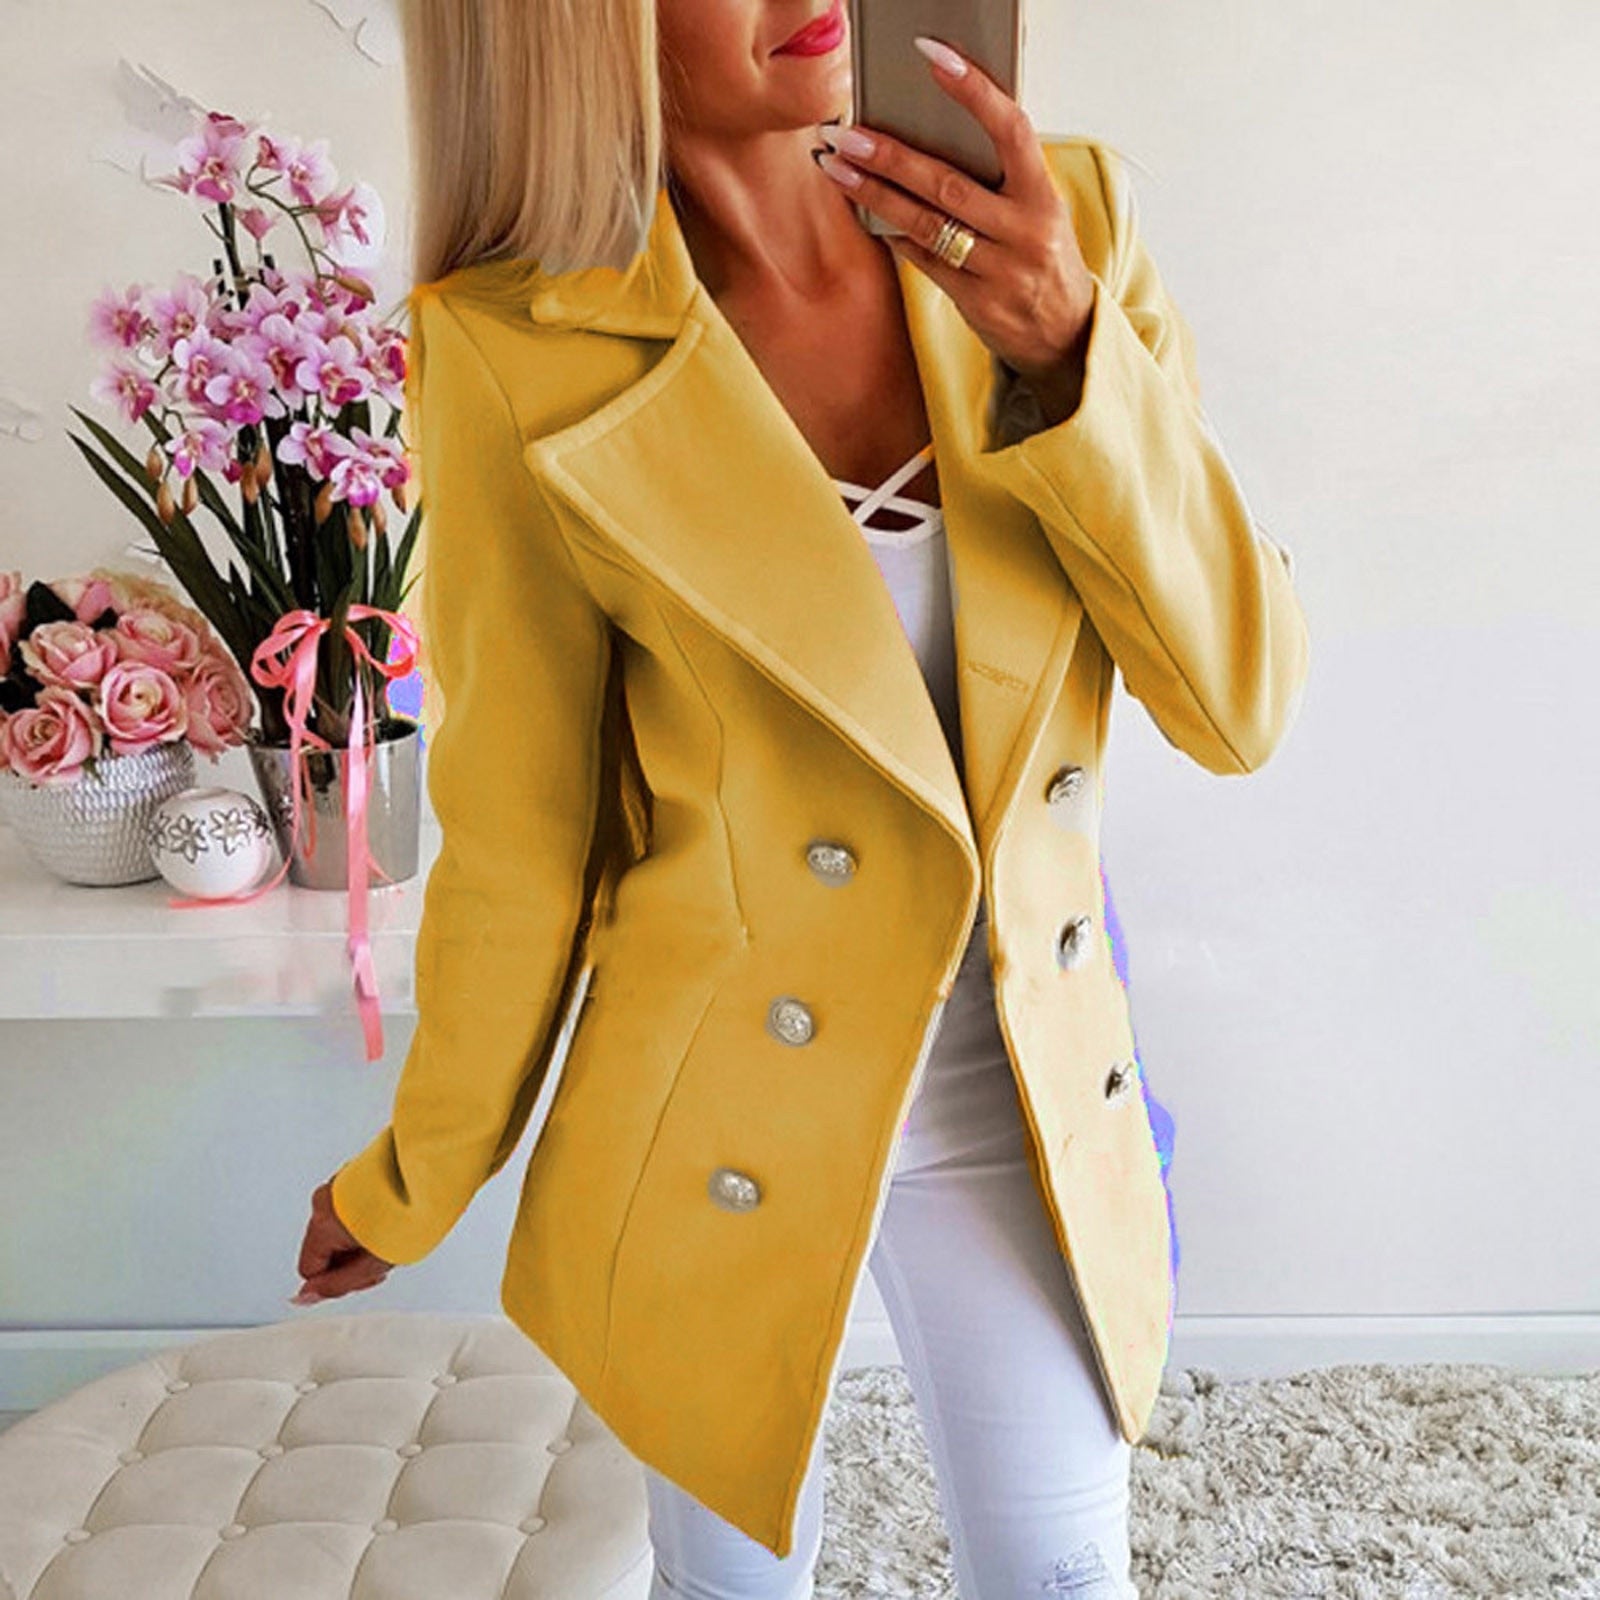 Billlnai Autumn Elegant Fashion Wool Blends Coat Womens Casual Solid Color Breasted Belted  Slim Coat Ladies Office Jacket Outwear